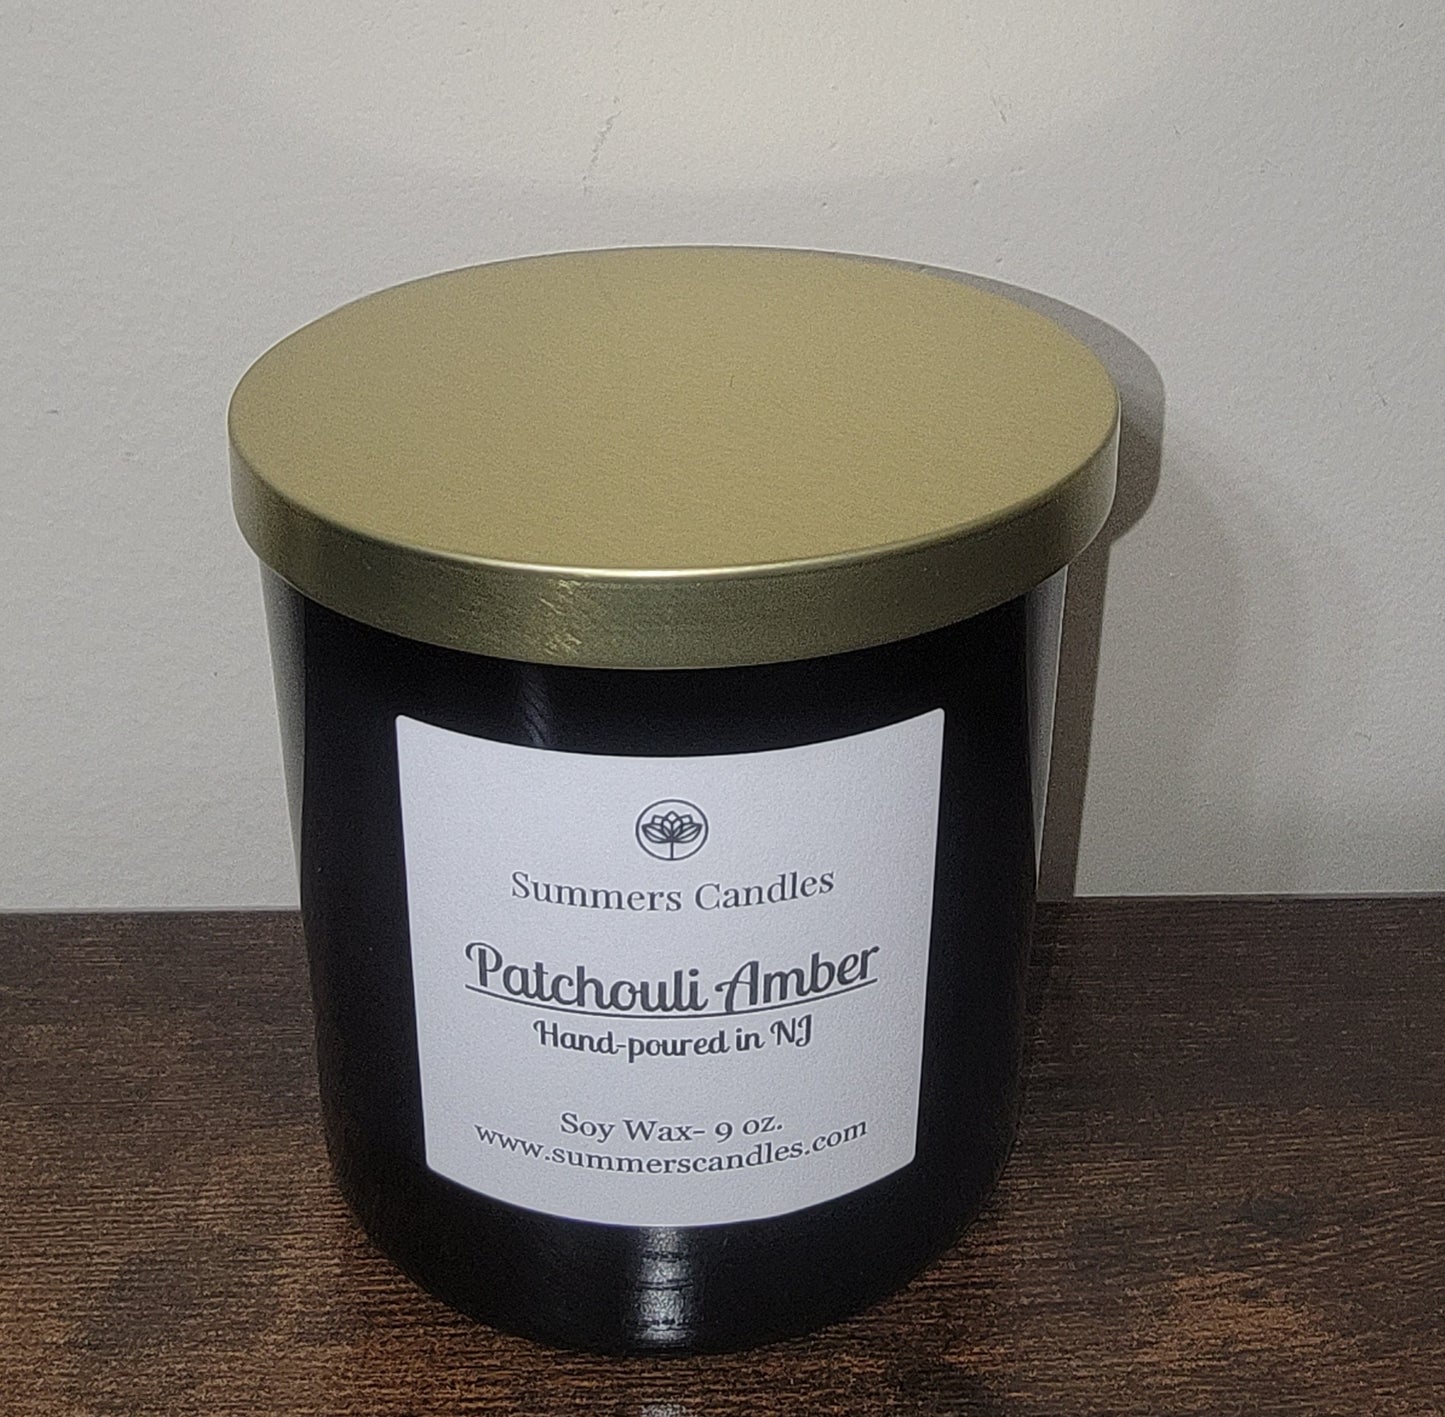 Patchouli Amber- Summers Candles